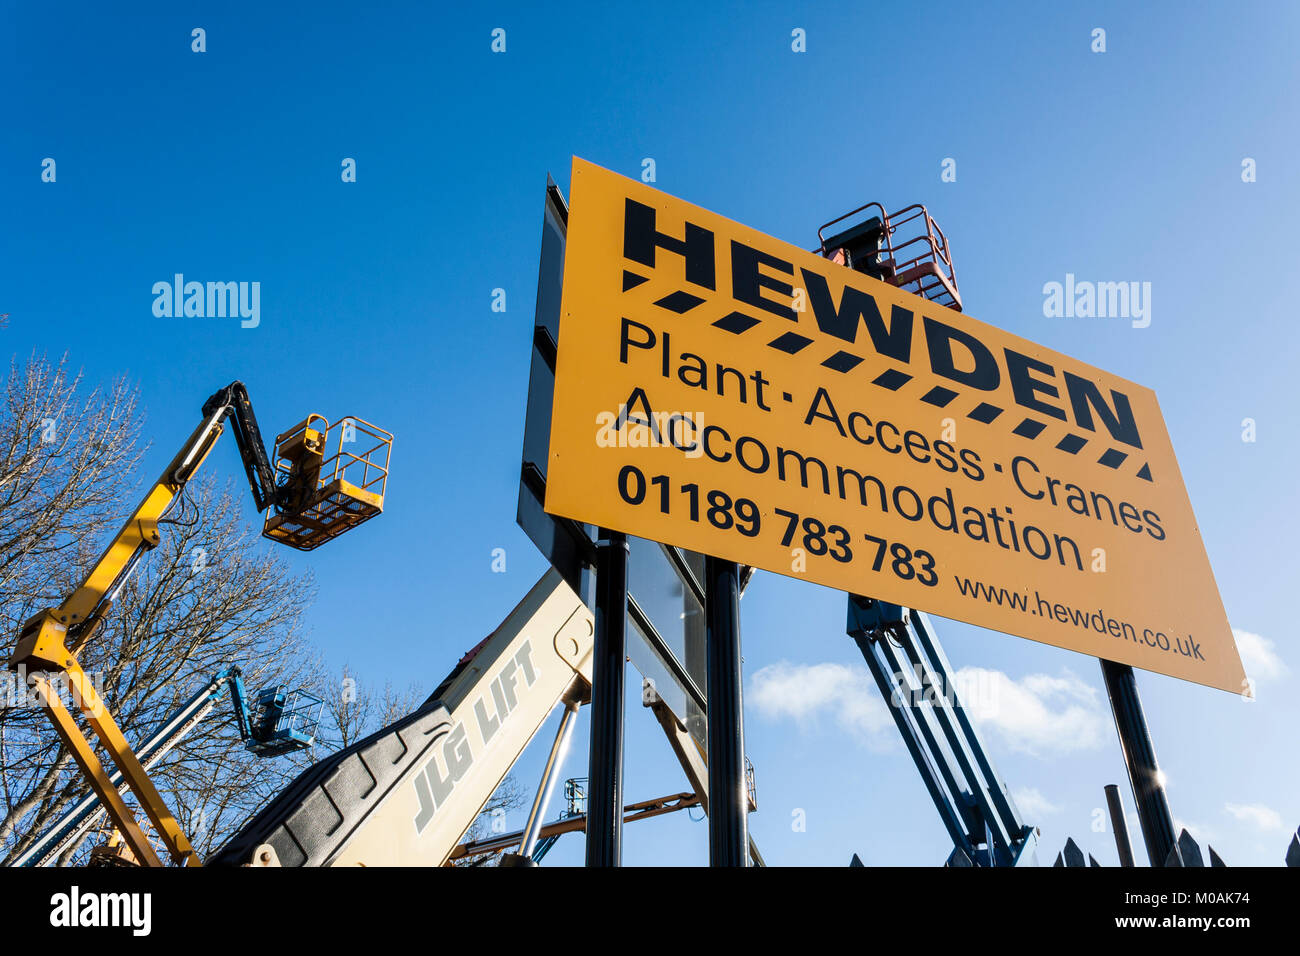 Hewden Plant and Machinery Hire Depot. Commonly known as cherry pickers, high access platforms at a site for rental of industrial plant machinery. Stock Photo